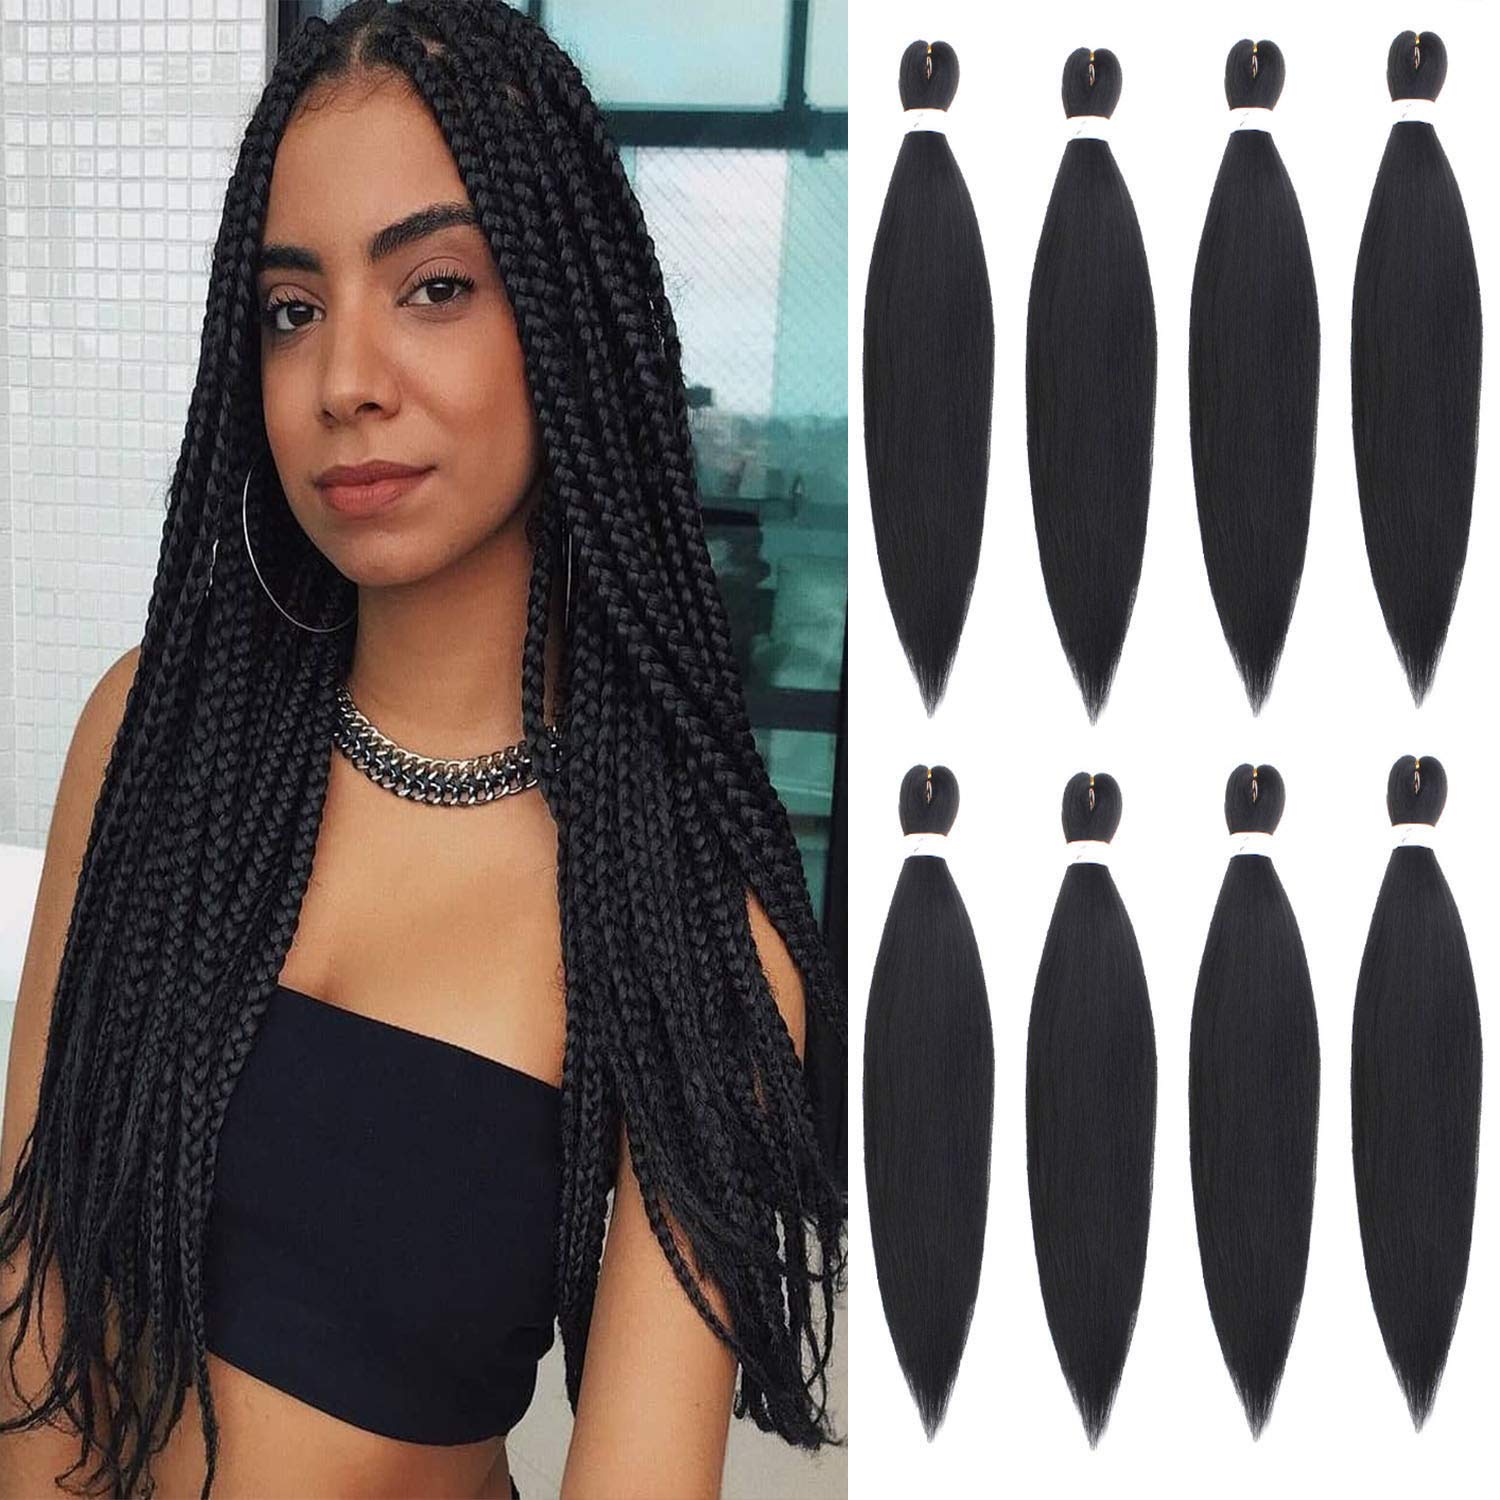 SYNTHETIC HAIR WITH OMBRE COLORED BRAIDS Blue | eBay